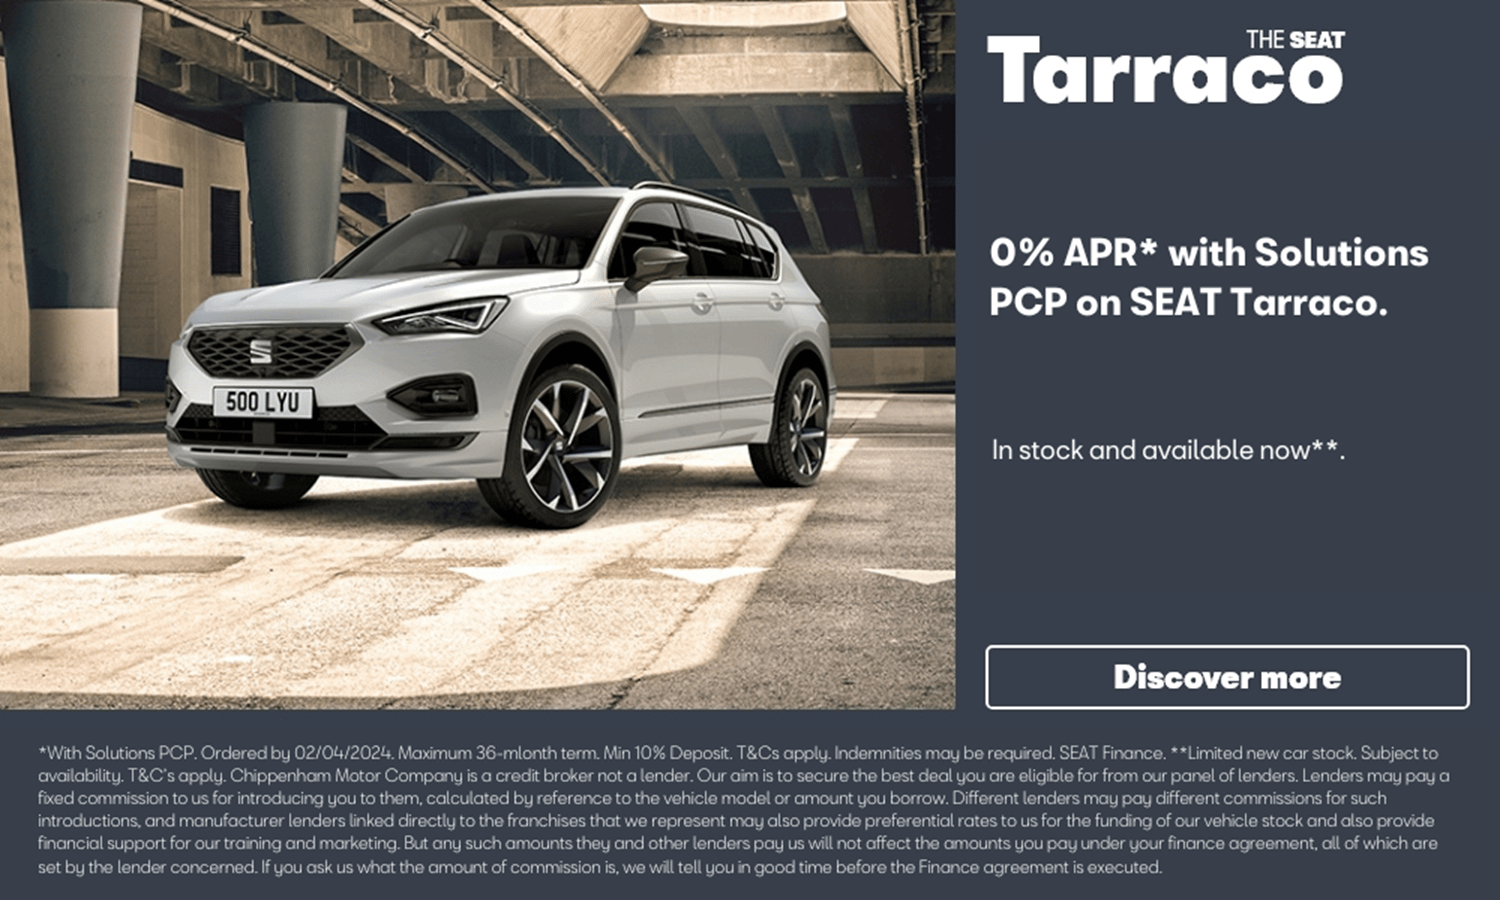 SEAT Tarraco with offer